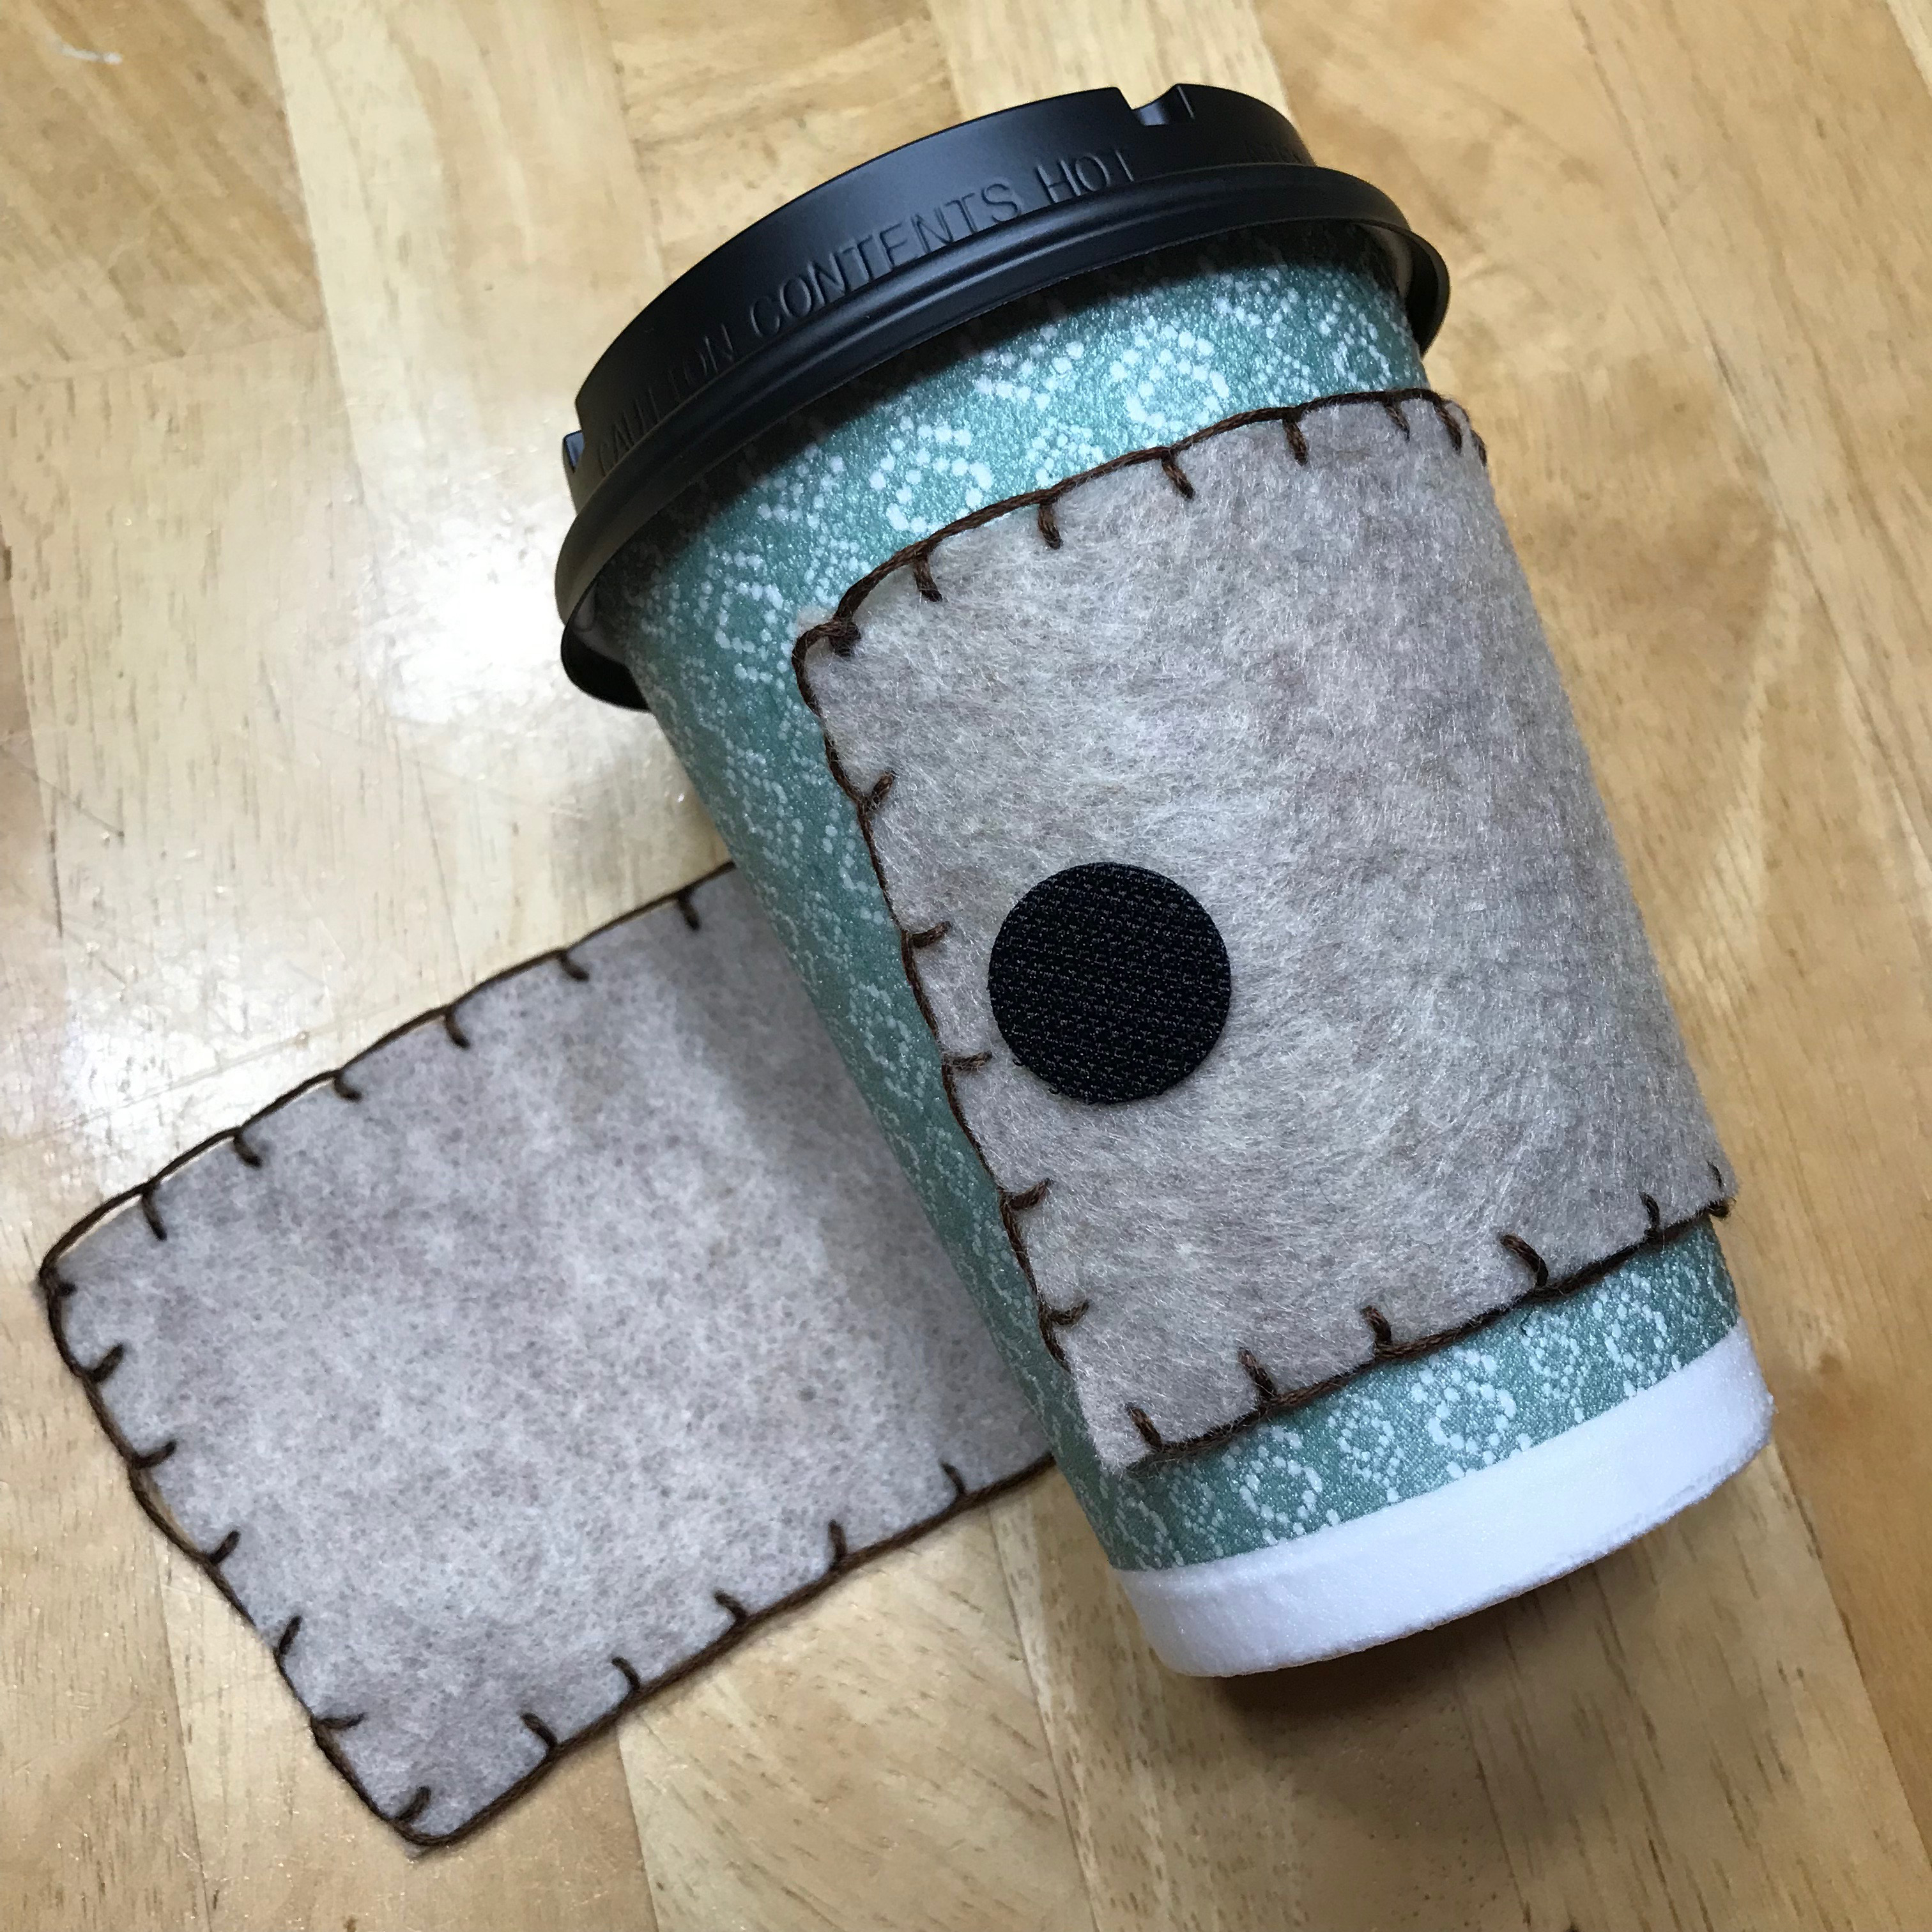 Felt Sleeve attached to cup